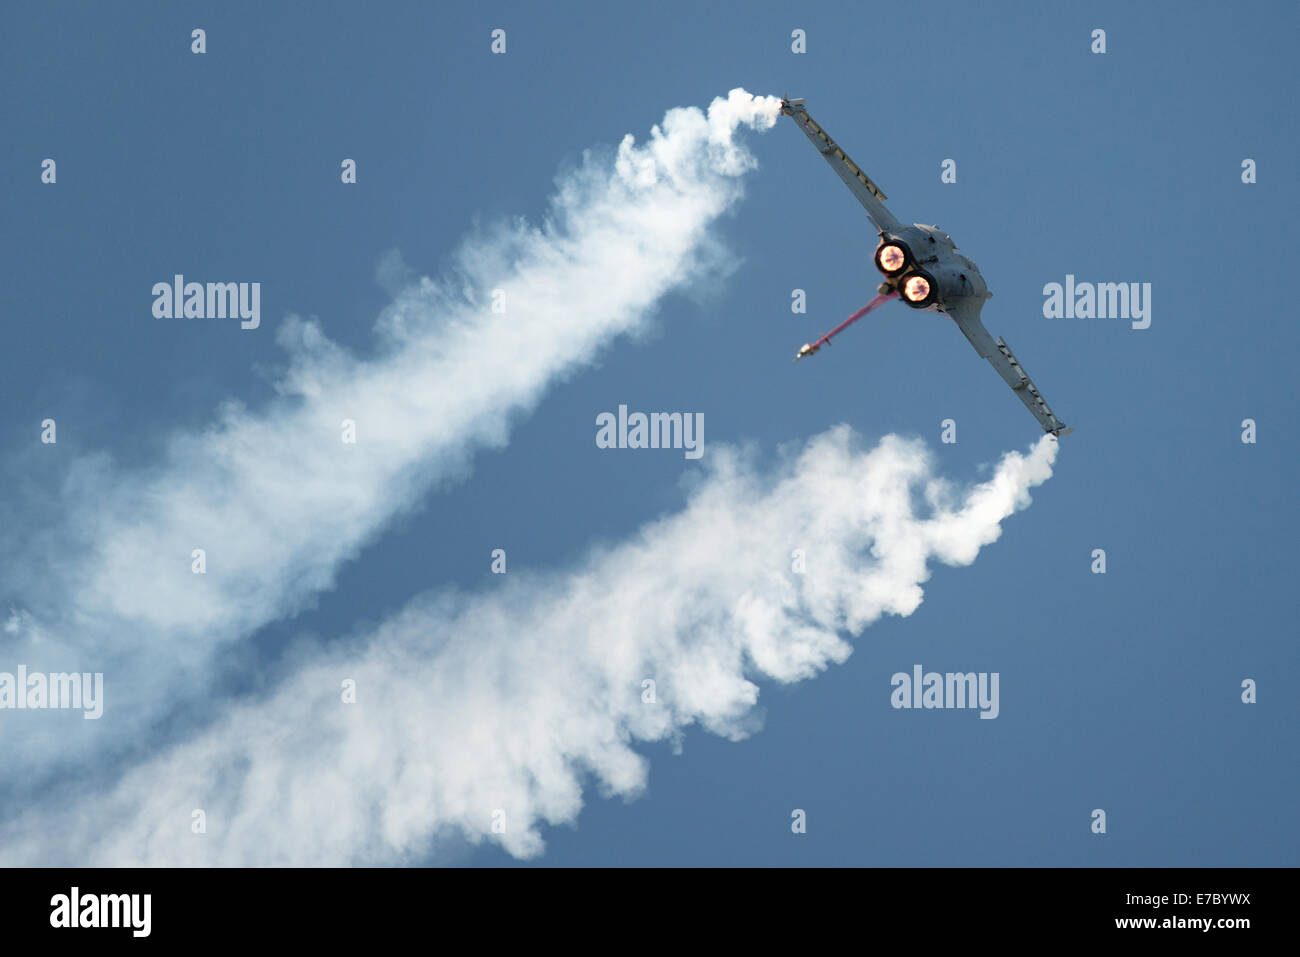 PAYERNE, SWITZERLAND - SEPTEMBER 6: Flight of Rafale jet fighter on AIR14 airshow in Payerne, Switzerland on September 6, 2014 Stock Photo